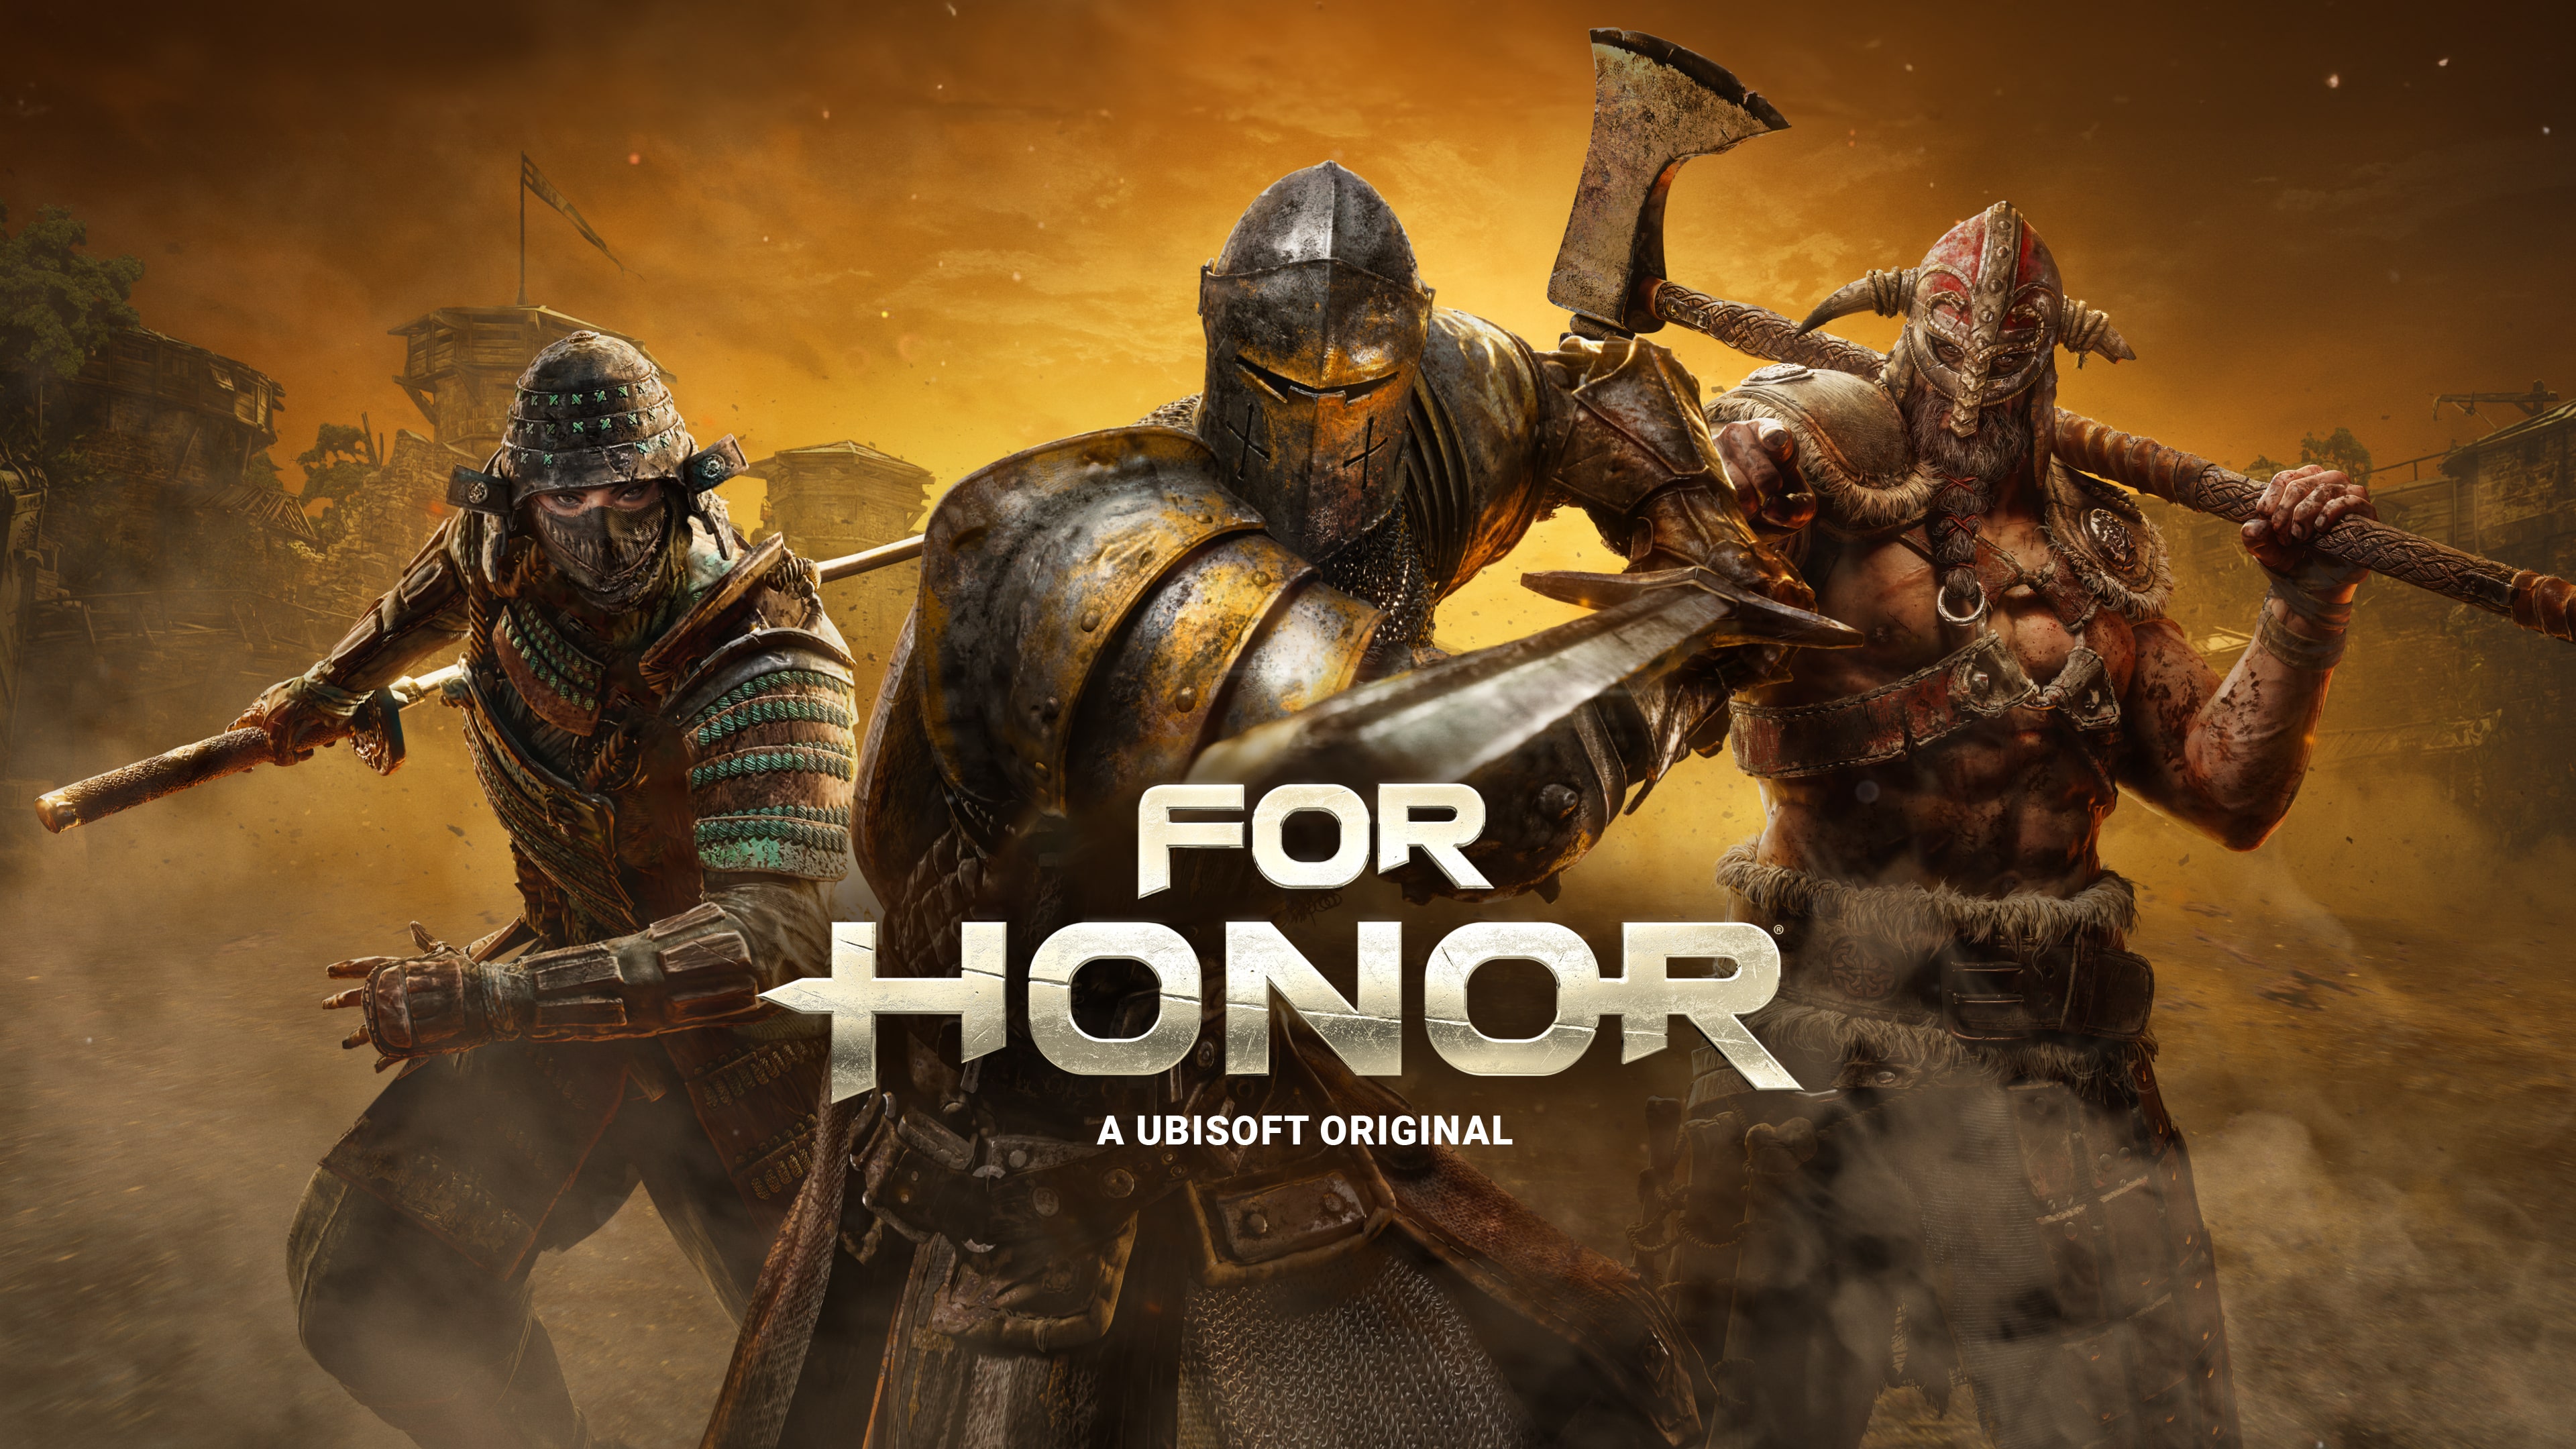 FOR HONOR (Simplified Chinese, English, Korean)